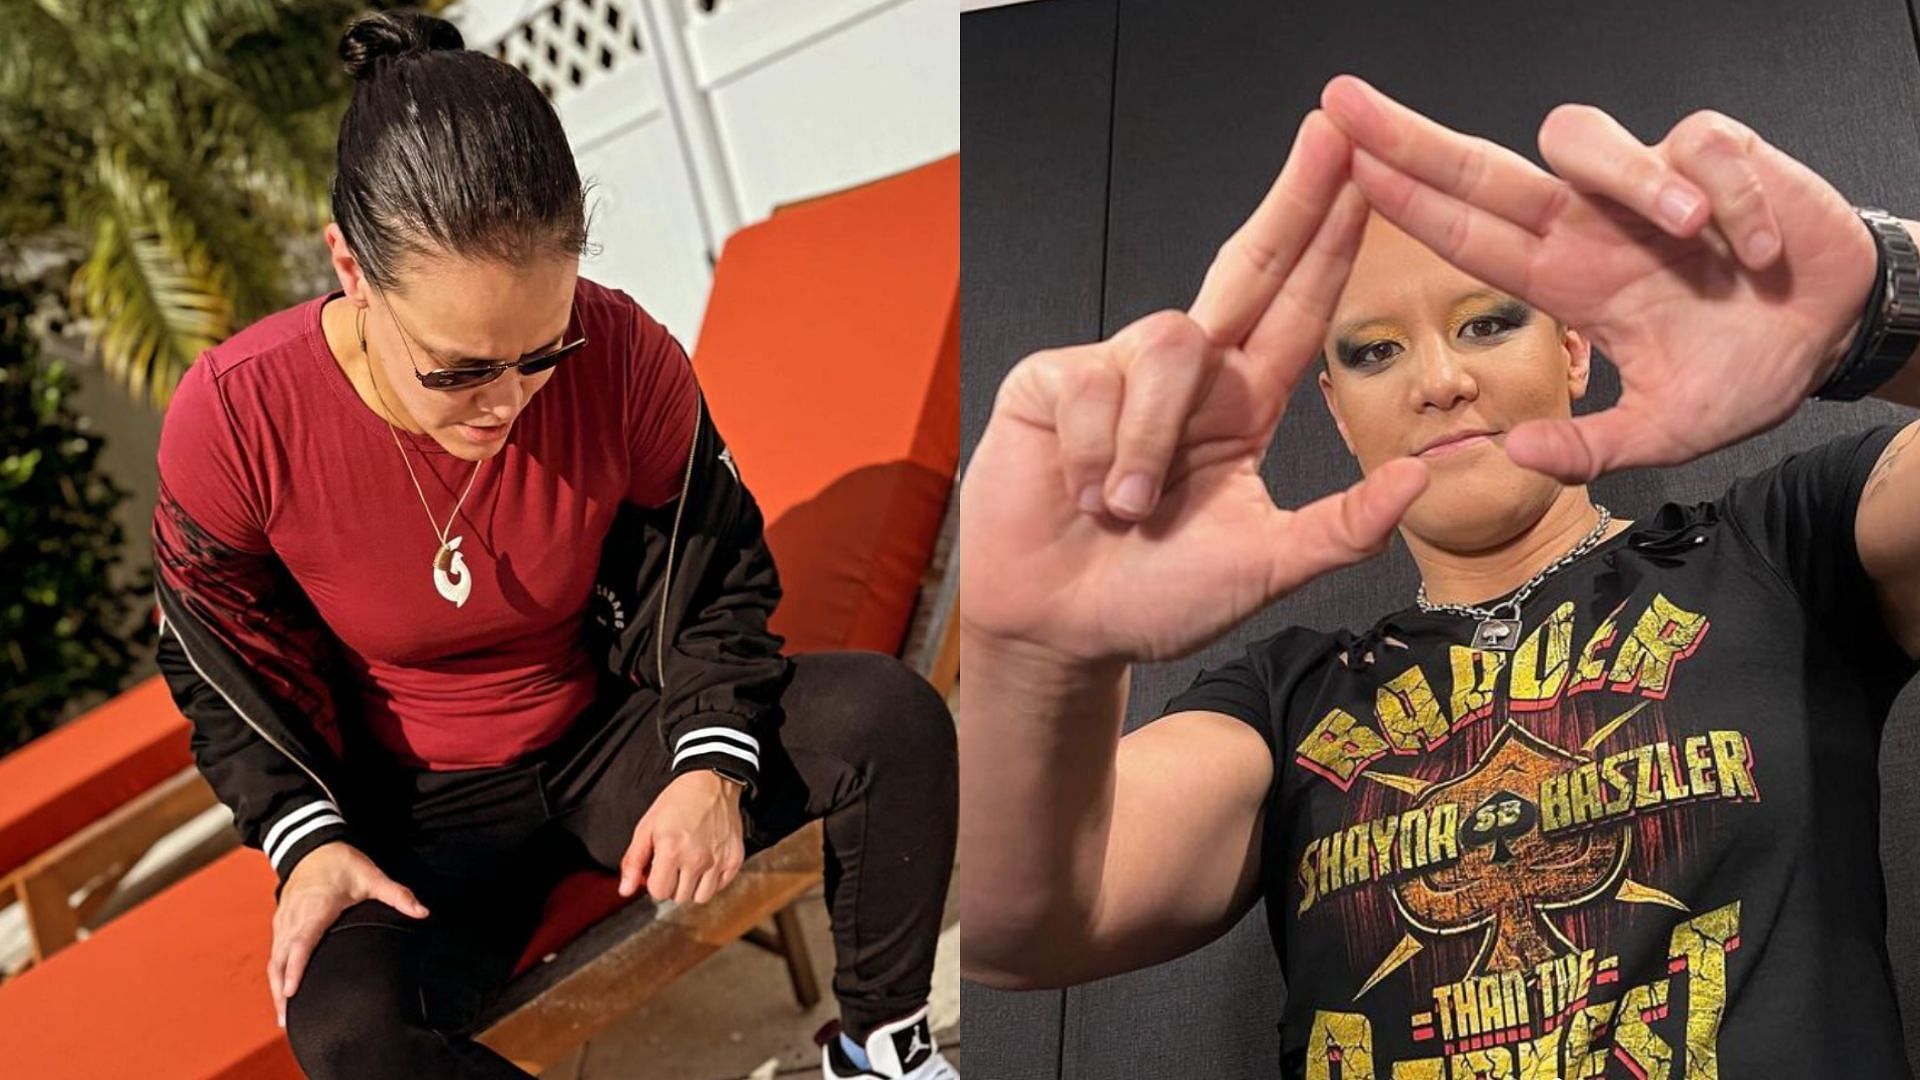 Baszler is currently in a tag team on RAW.